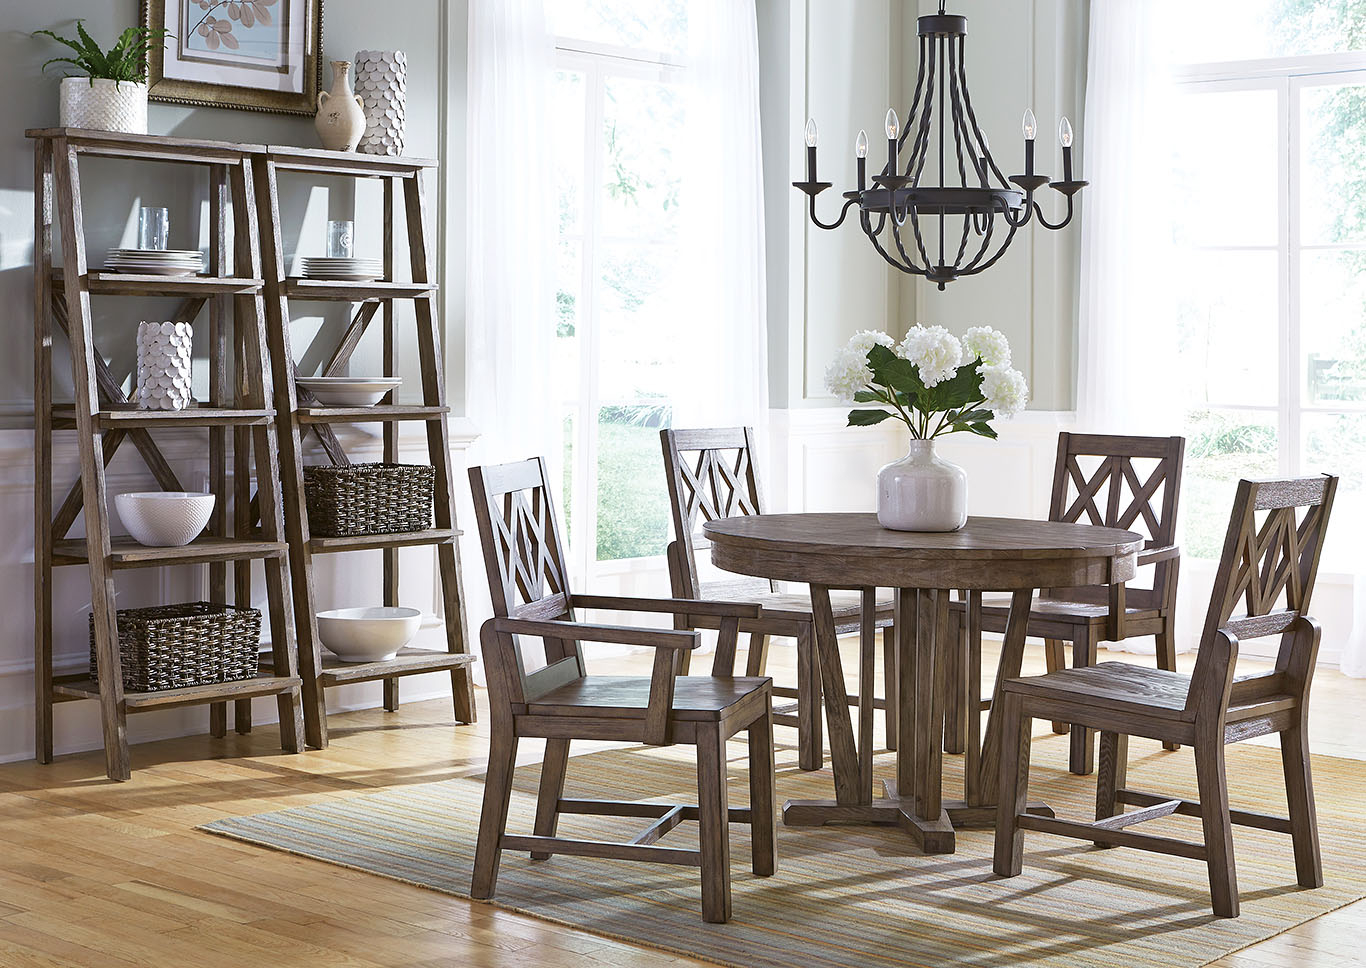 Foundry Driftwood Round Dining Set w/2 Wood Side Chairs & 2 Wood Arm Chairs,Kincaid